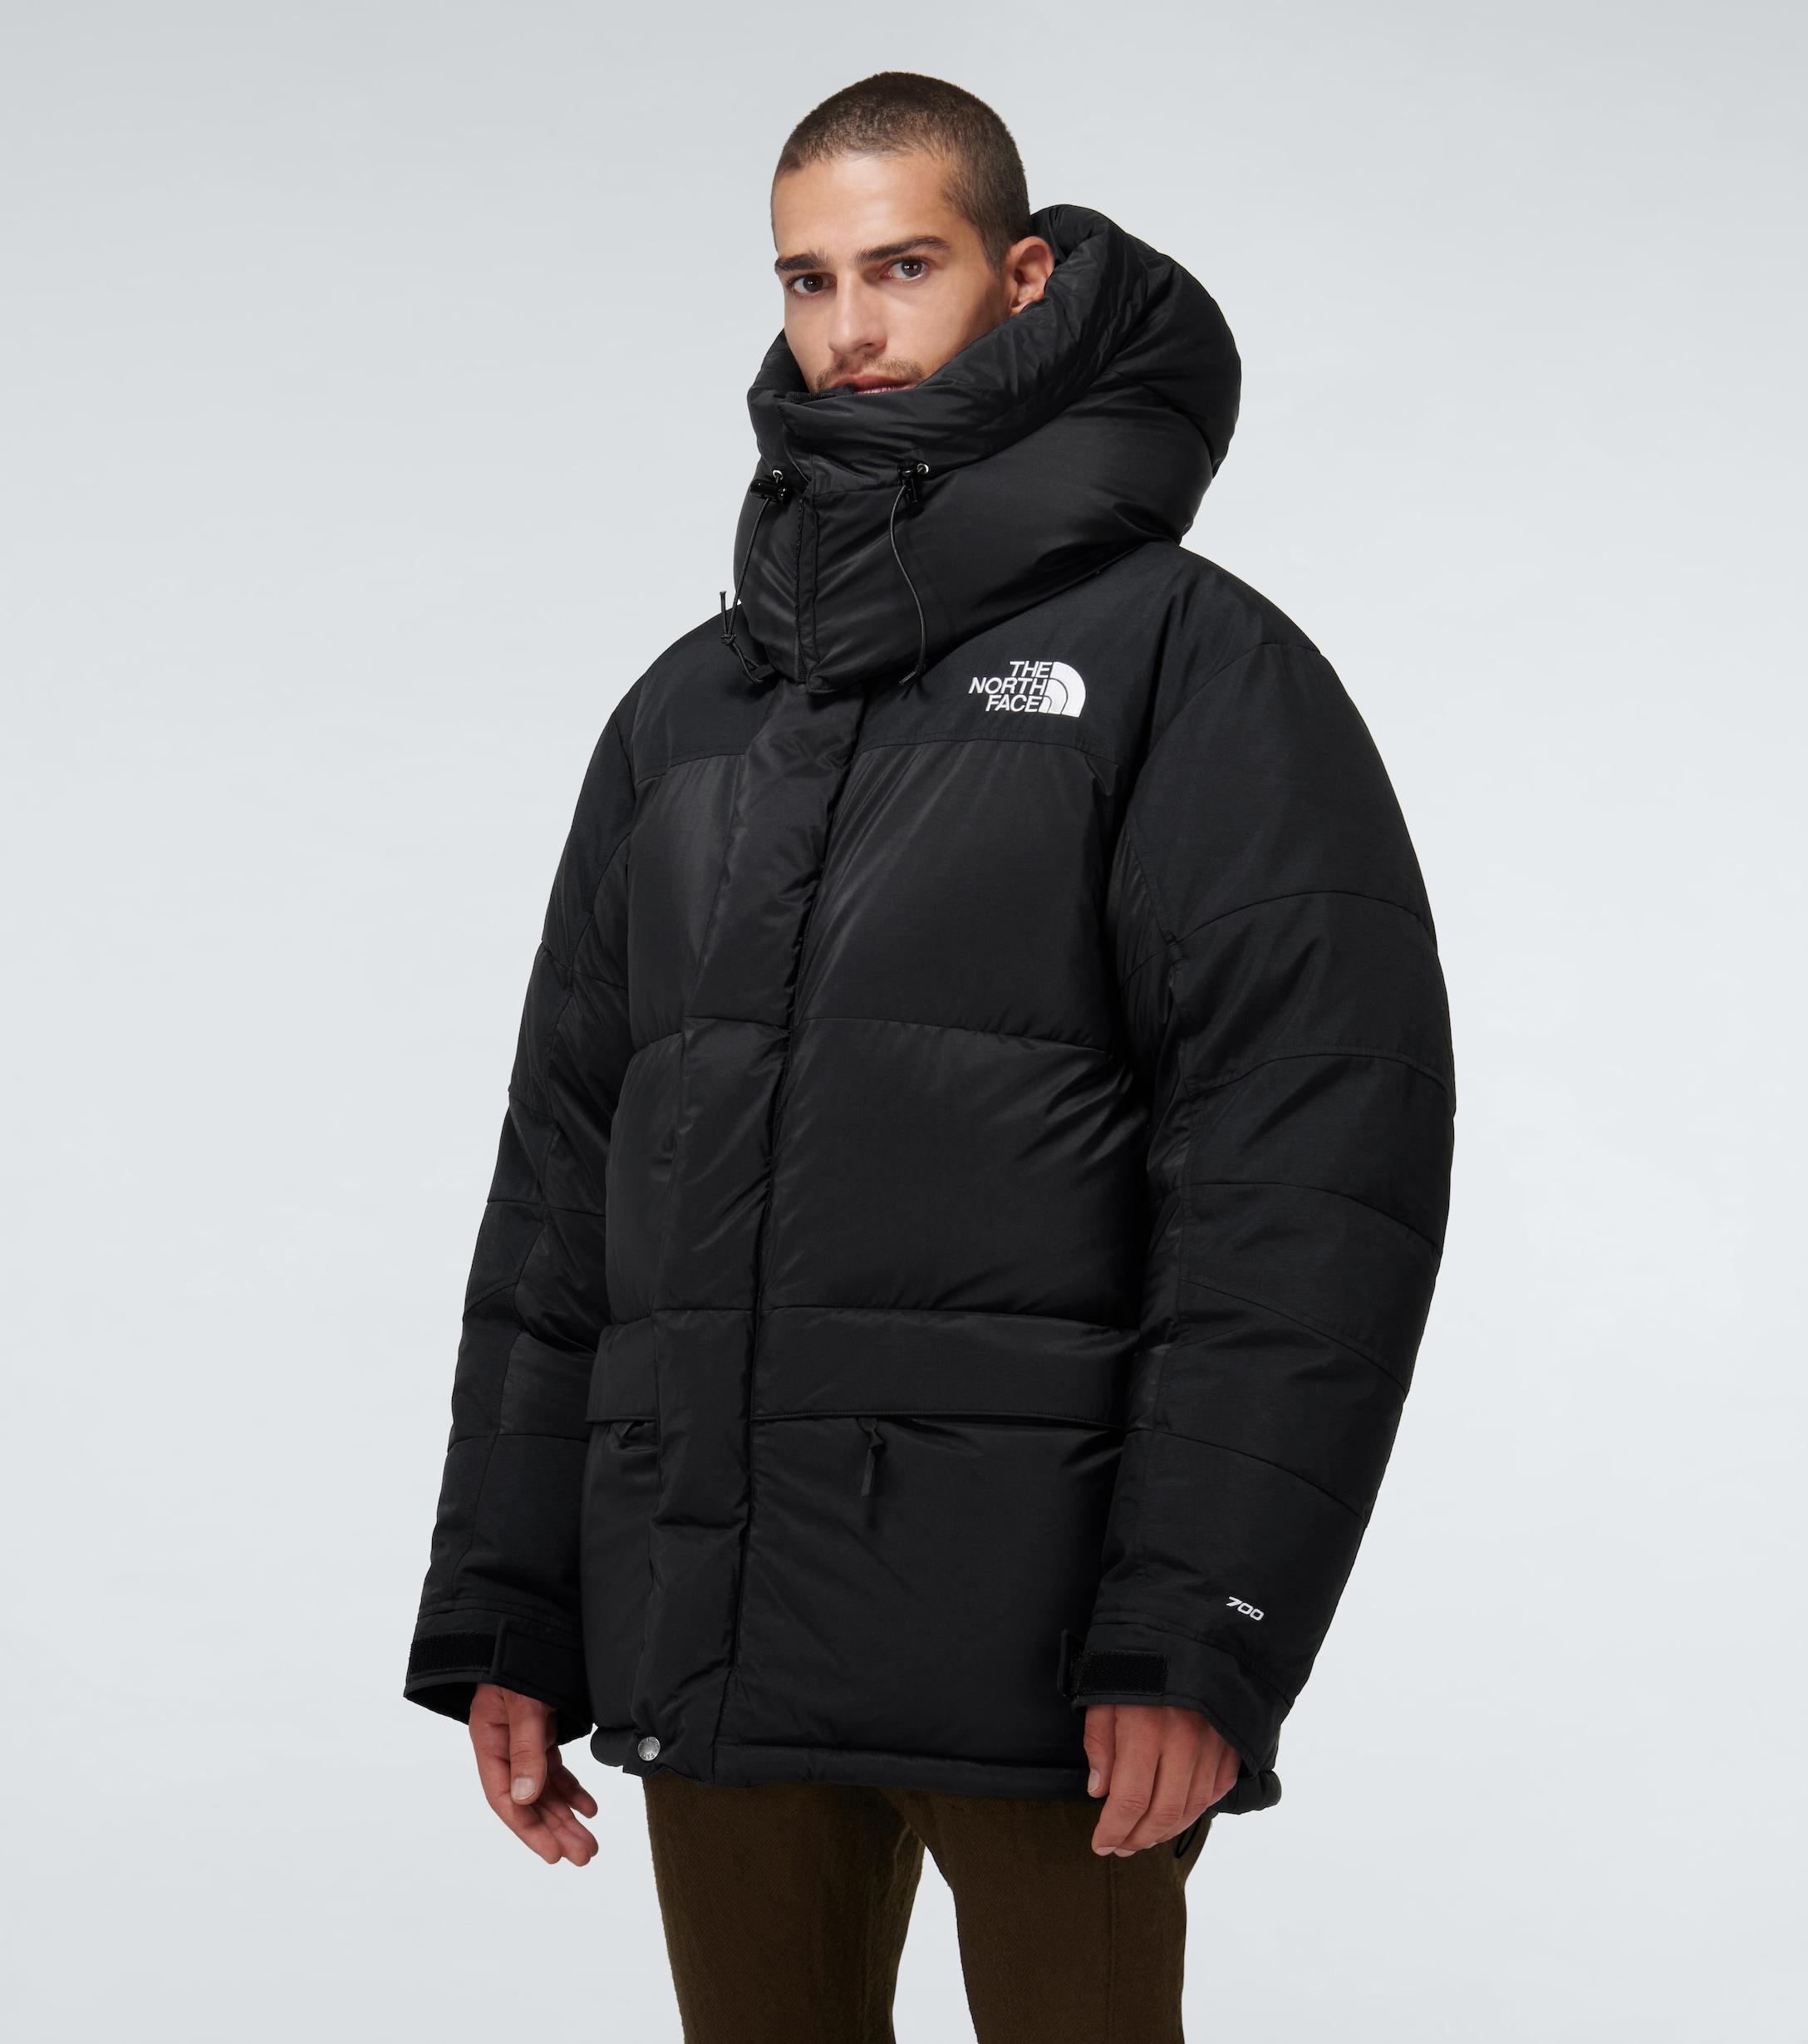 Stuhl Koffer Clever the north face himalayan retro Einfachheit ...